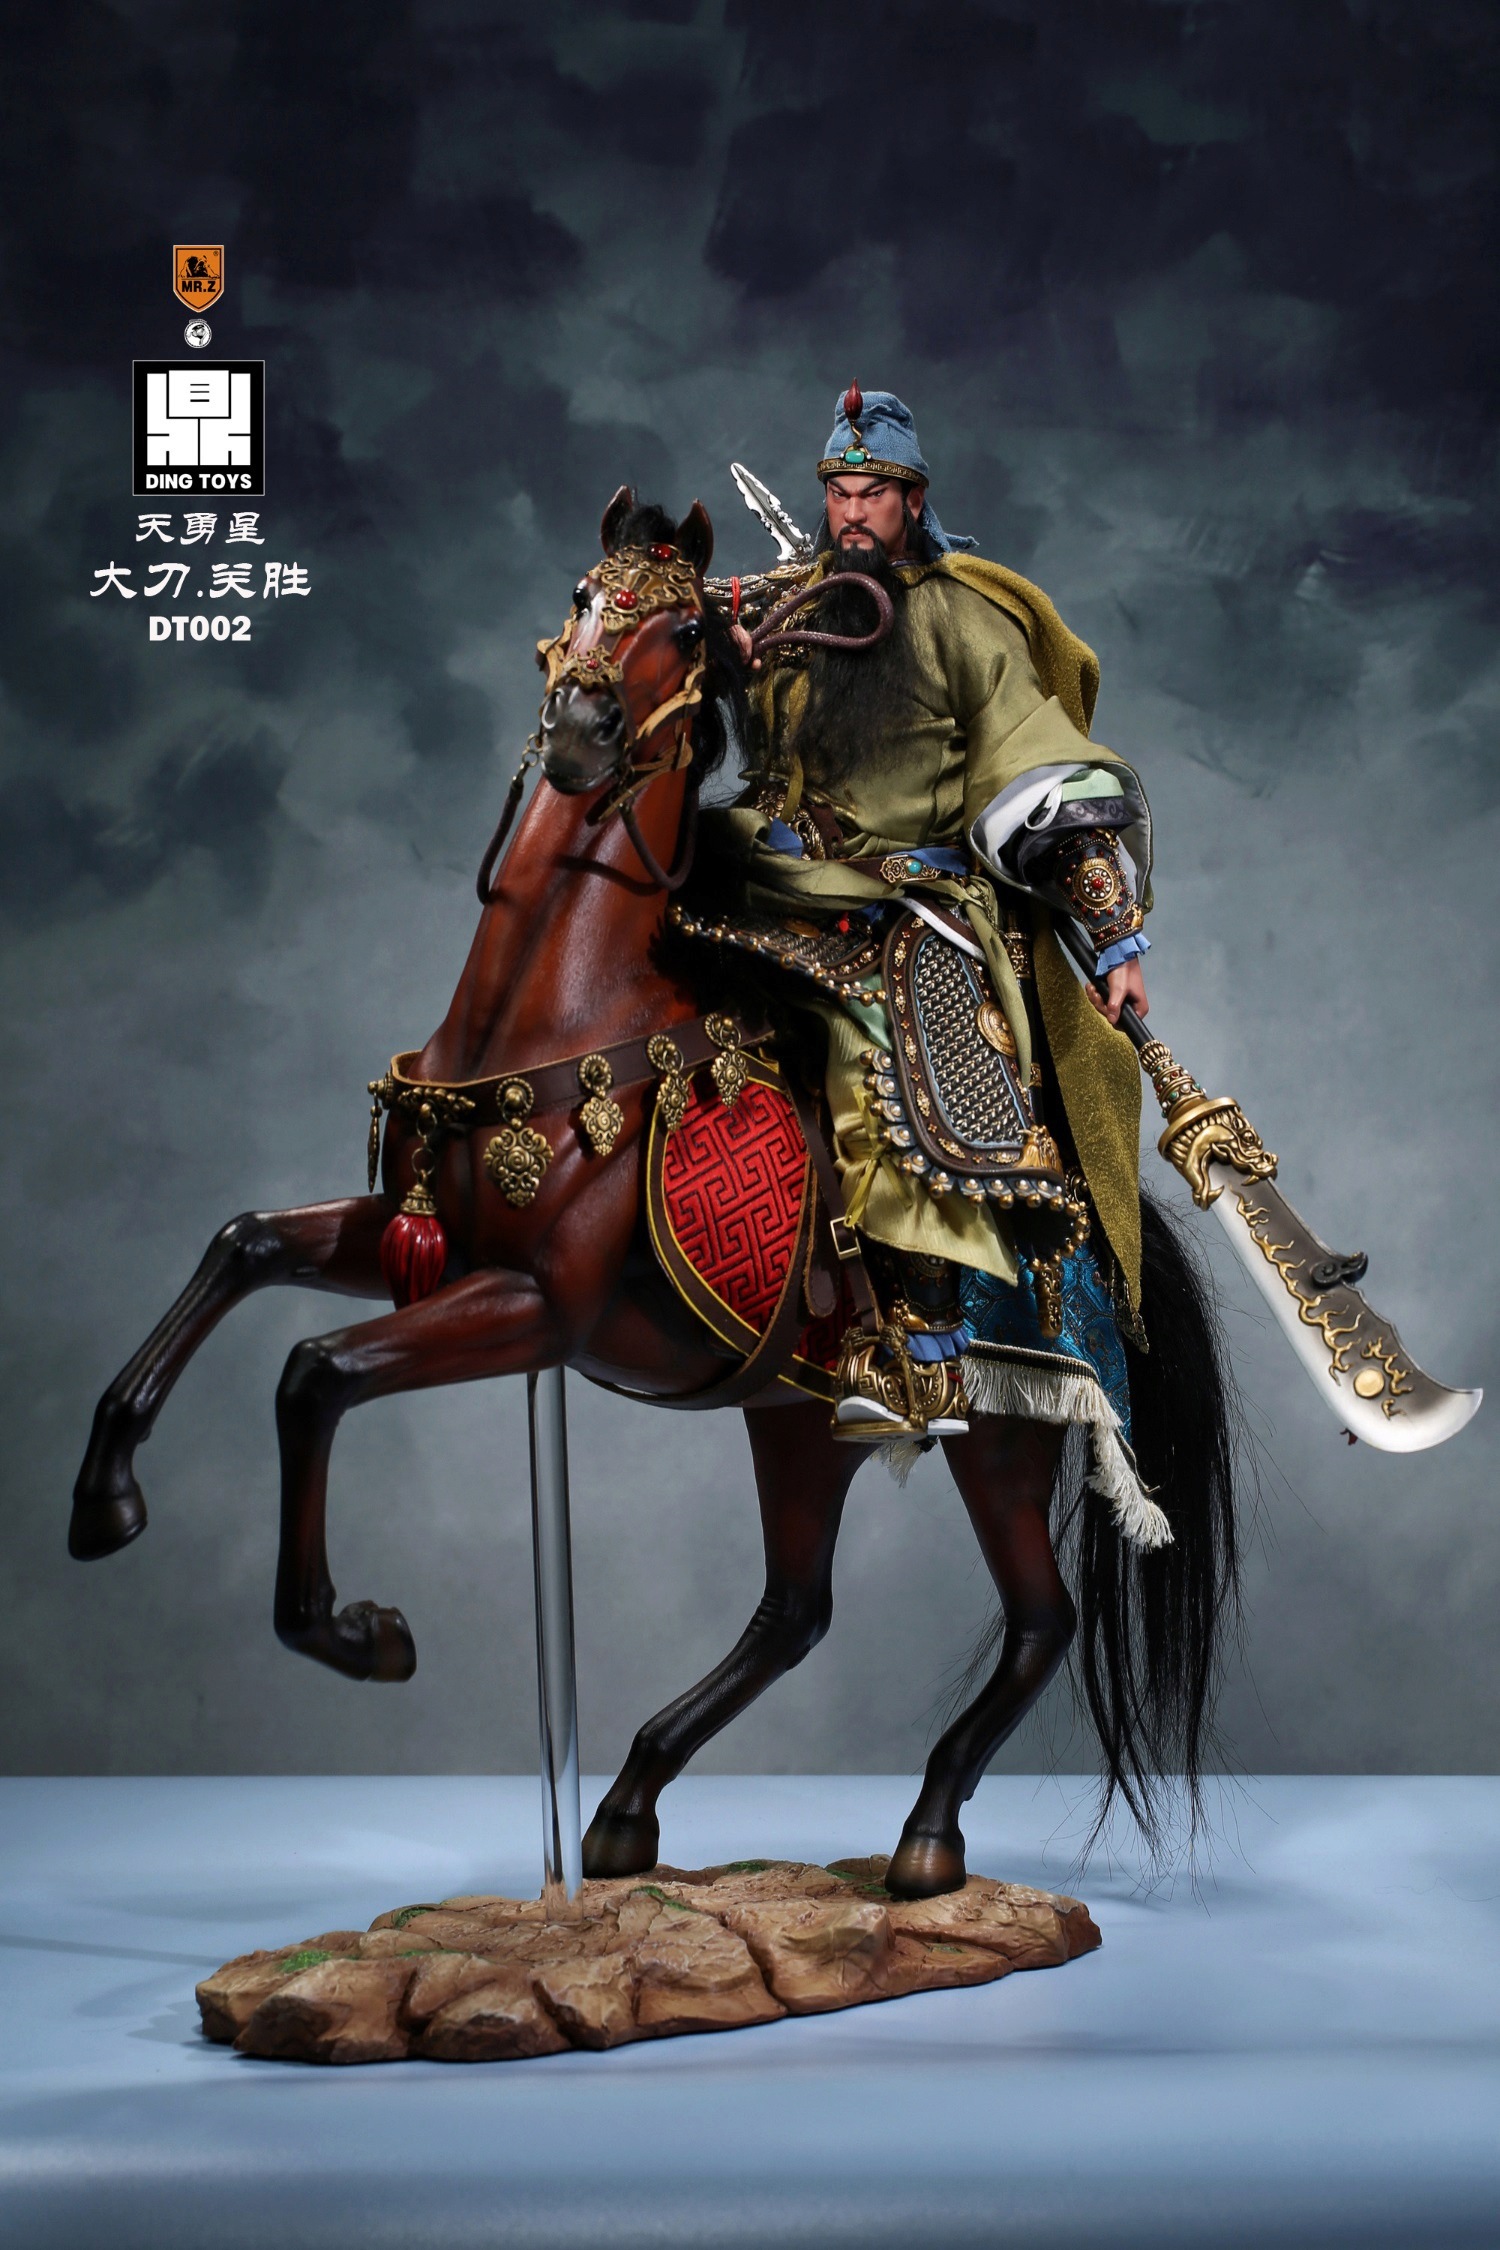 DingToys - NEW PRODUCT: Mr.Z x Ding Toys DT002 1/6 Scale 《Water Margin》Guan Sheng, War Horse 3431